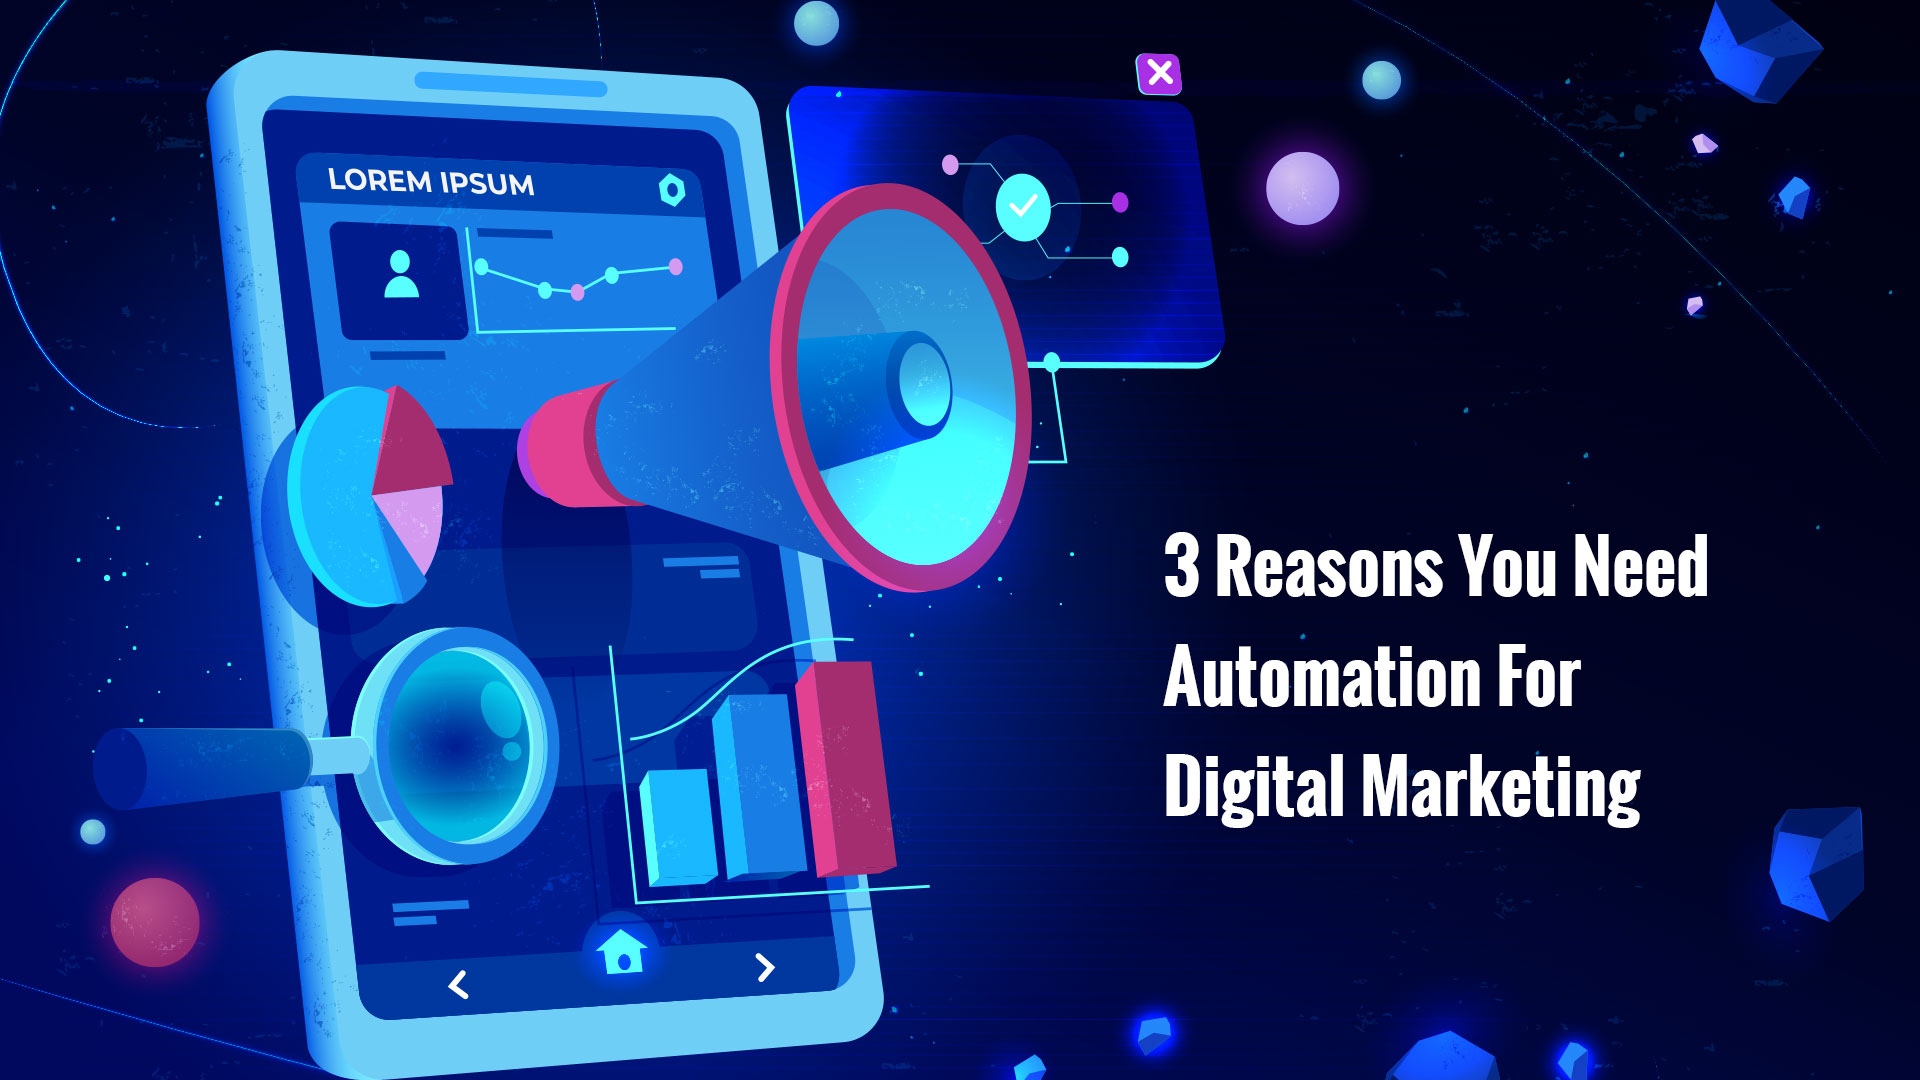 3 Reasons You Need Automation For Digital Marketing